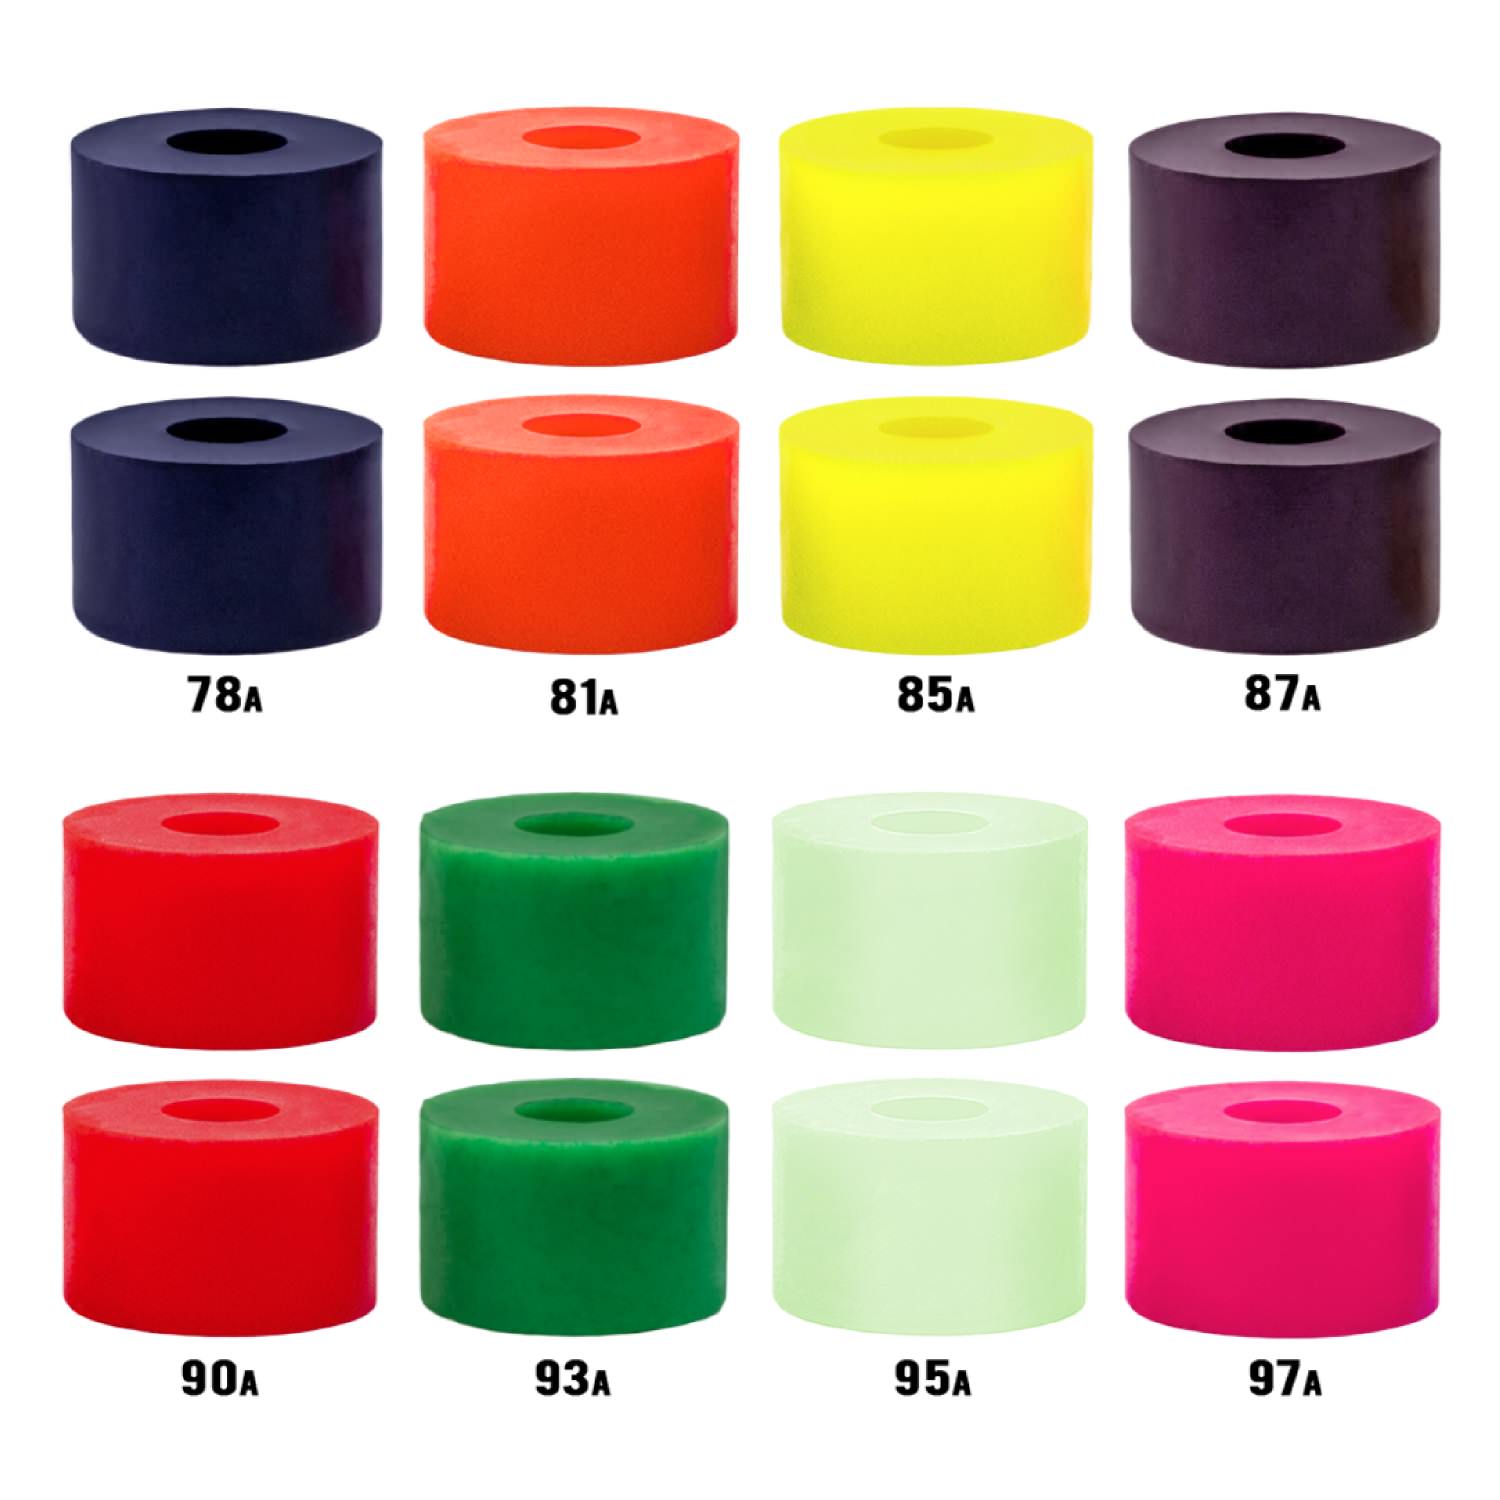 Venom Tall Bushings (All Shapes and Durometers)